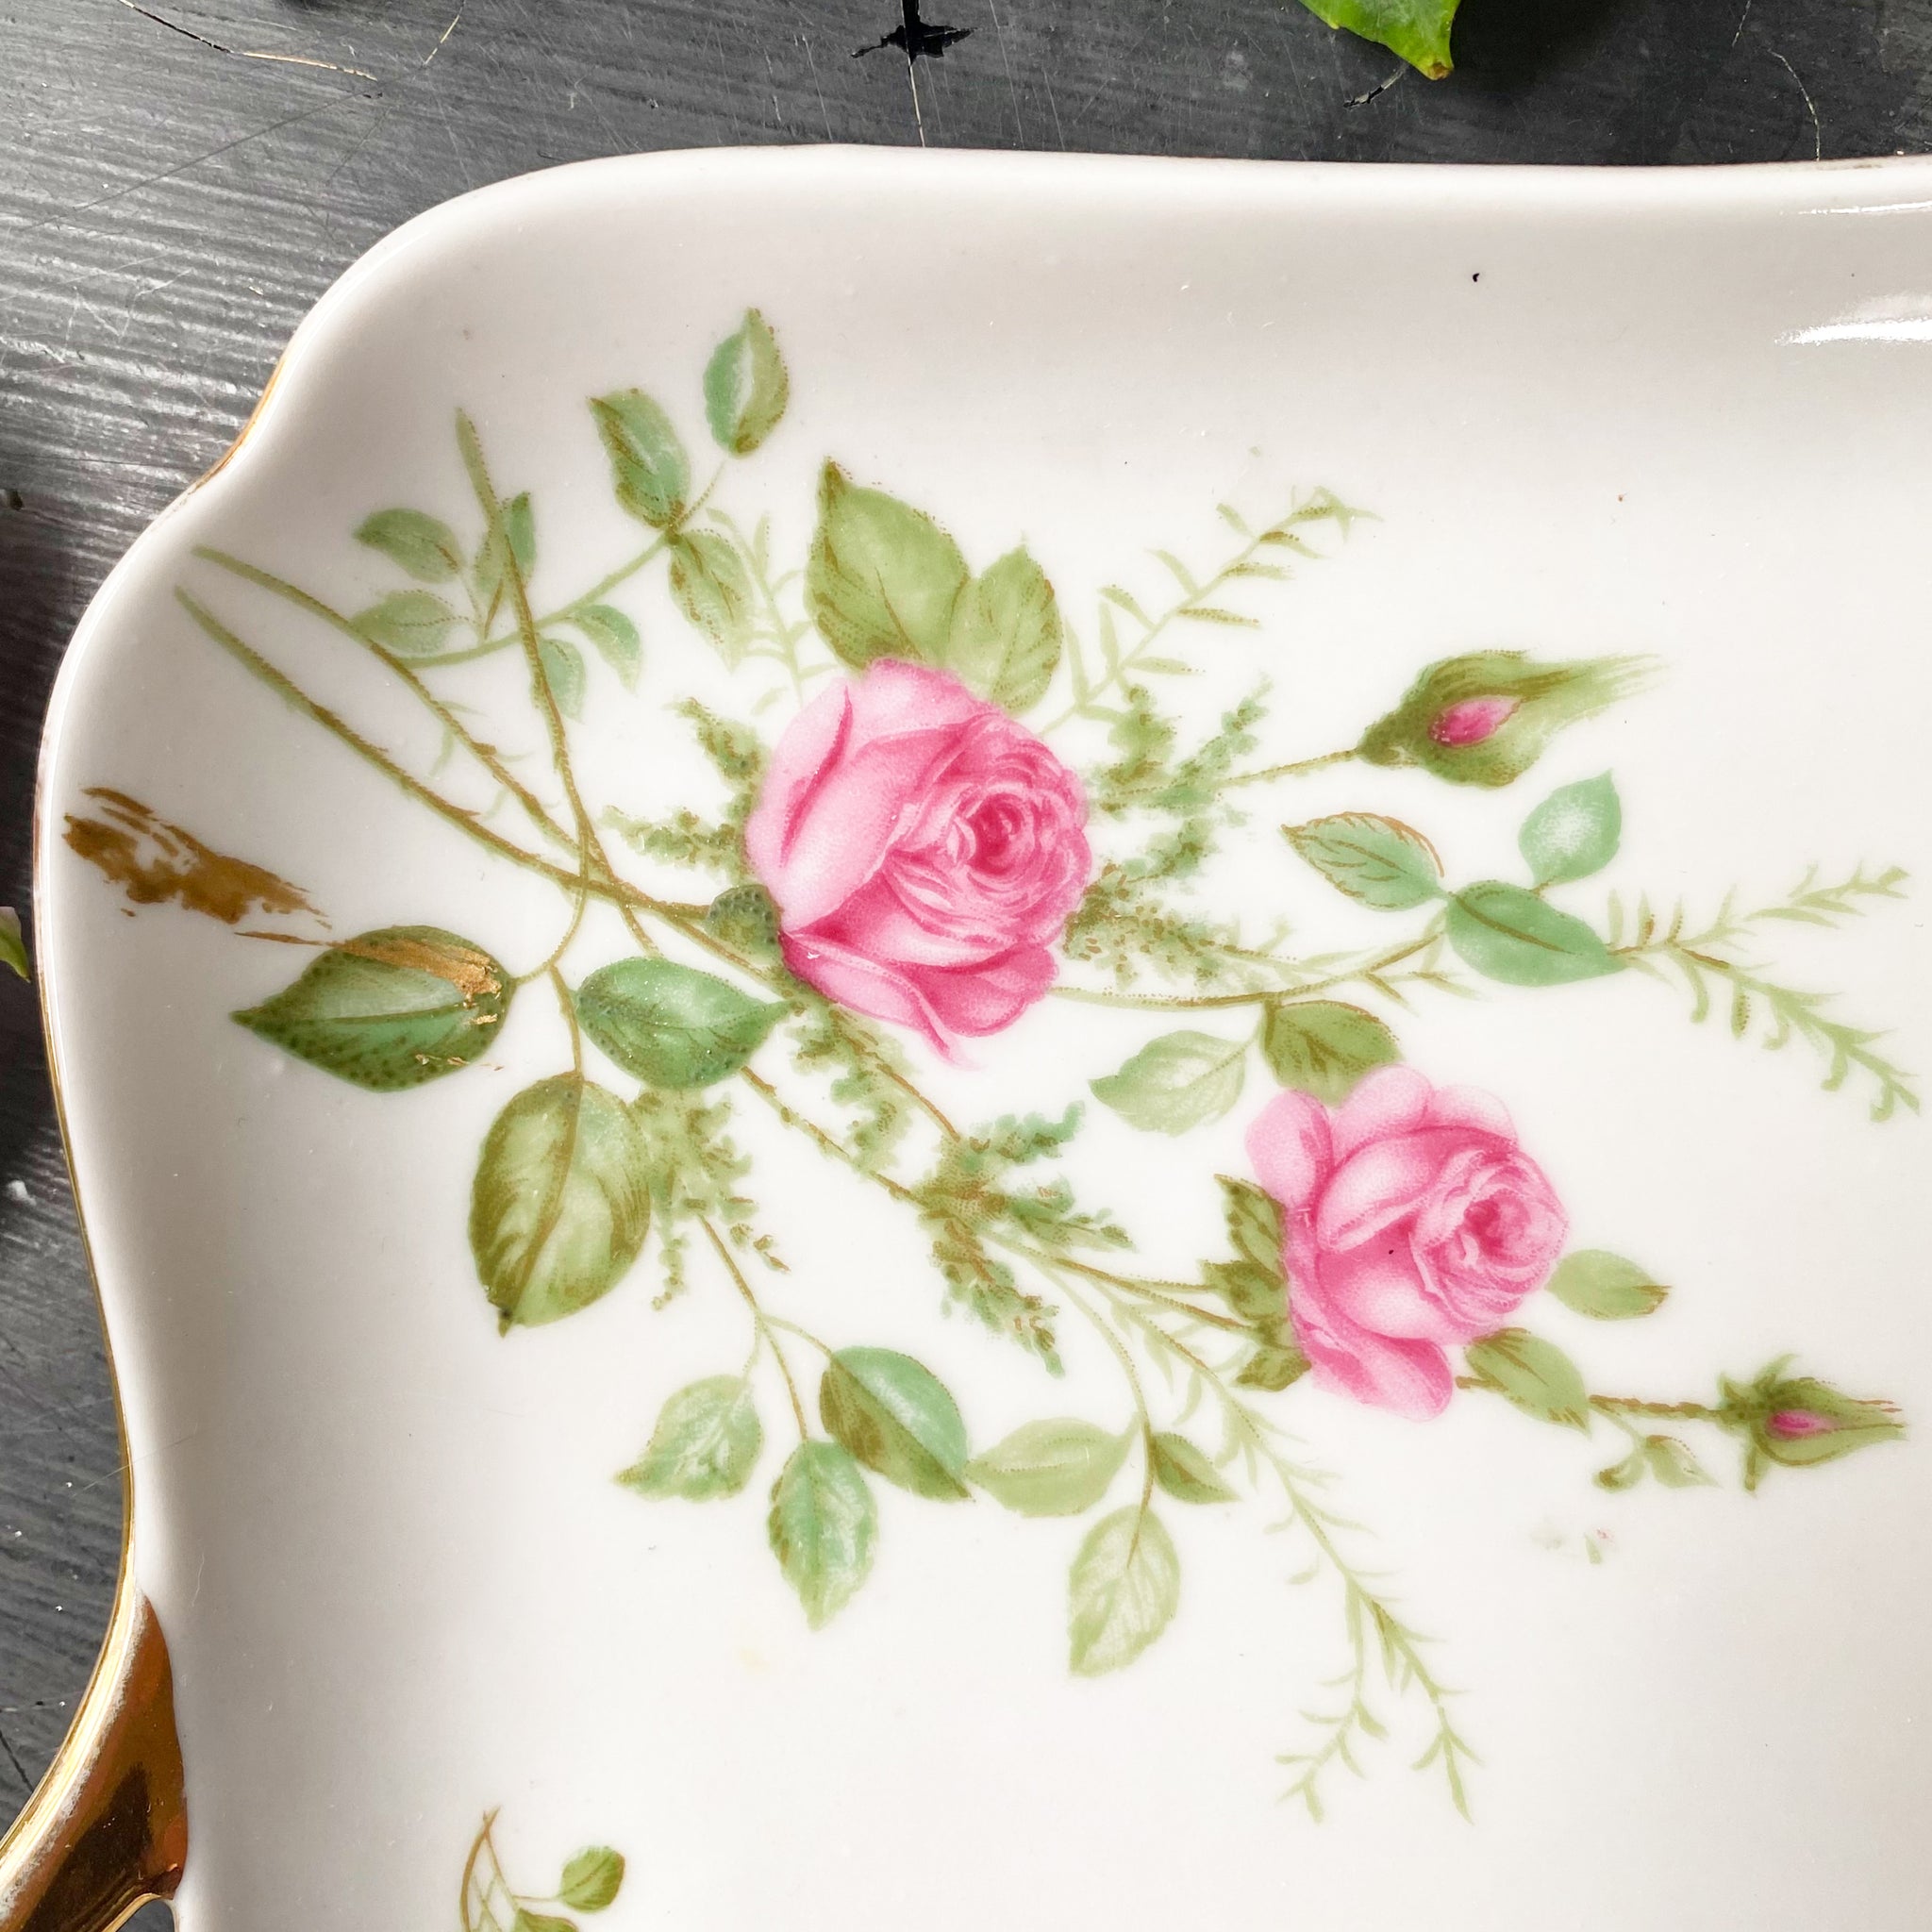 Vintage German Porcelain Serving Tray with Pink Roses by Cico circa 1949-1955